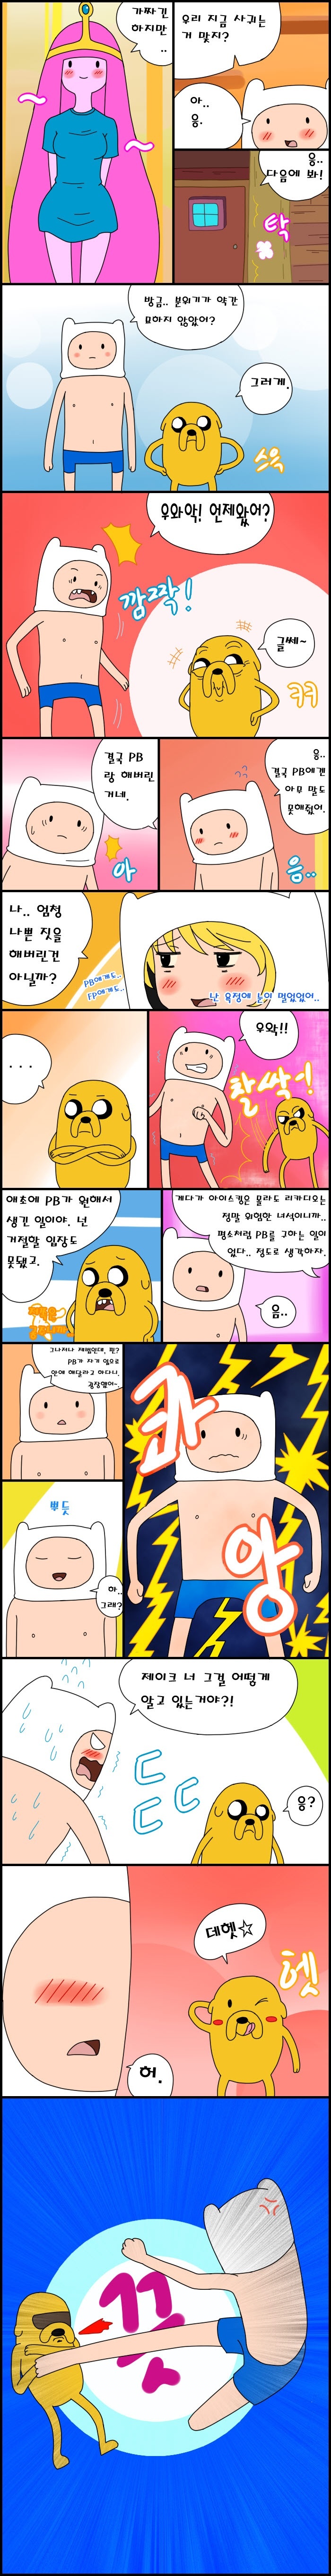 Adventure TIme Adult Time 2 